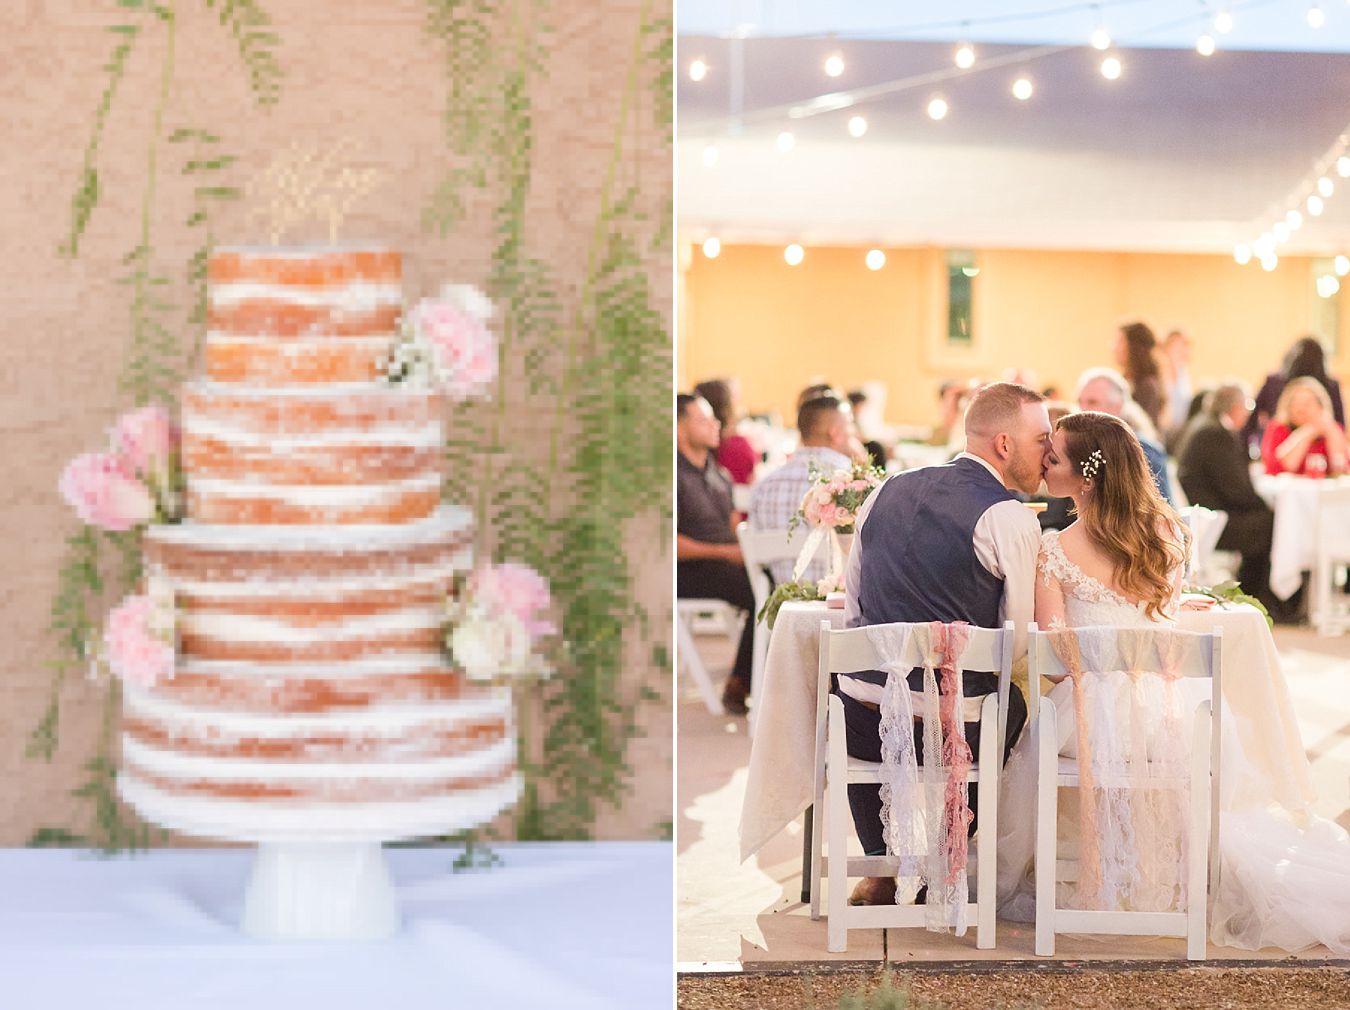 unique wedding cakes, bakery in Tucson, bride and groom sweetheart table